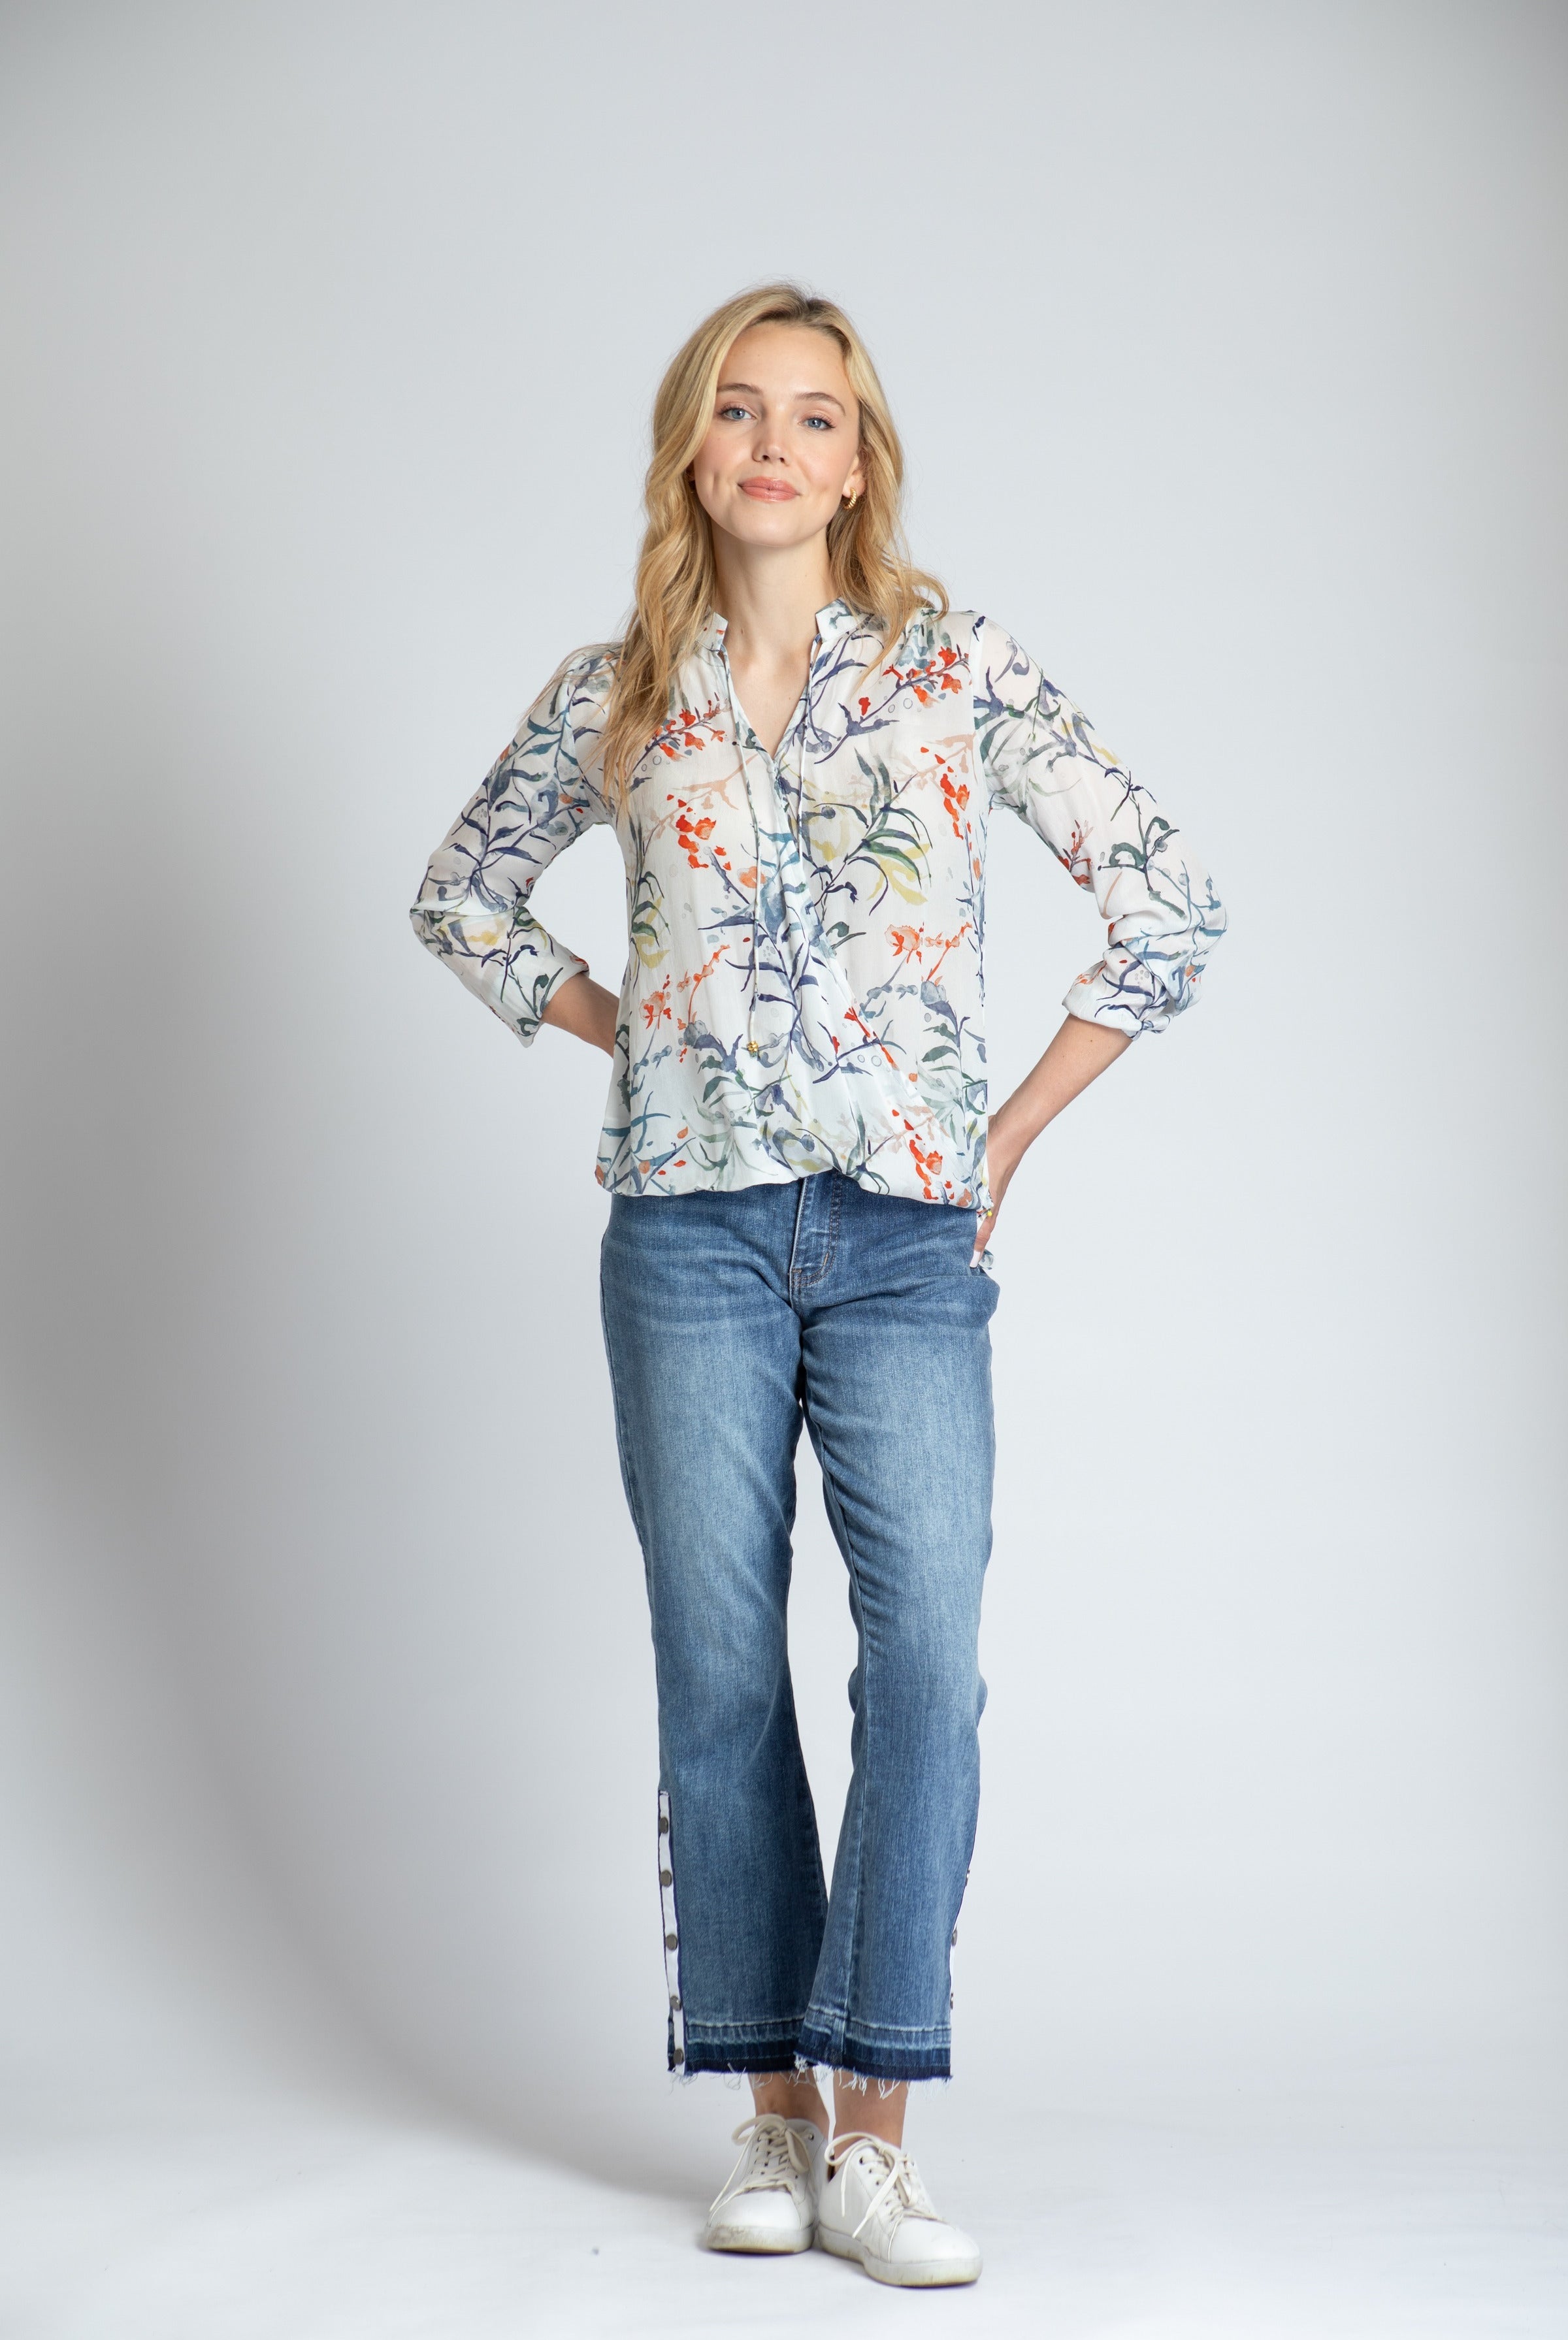  Botanical Print - Crossover Top With Tassel